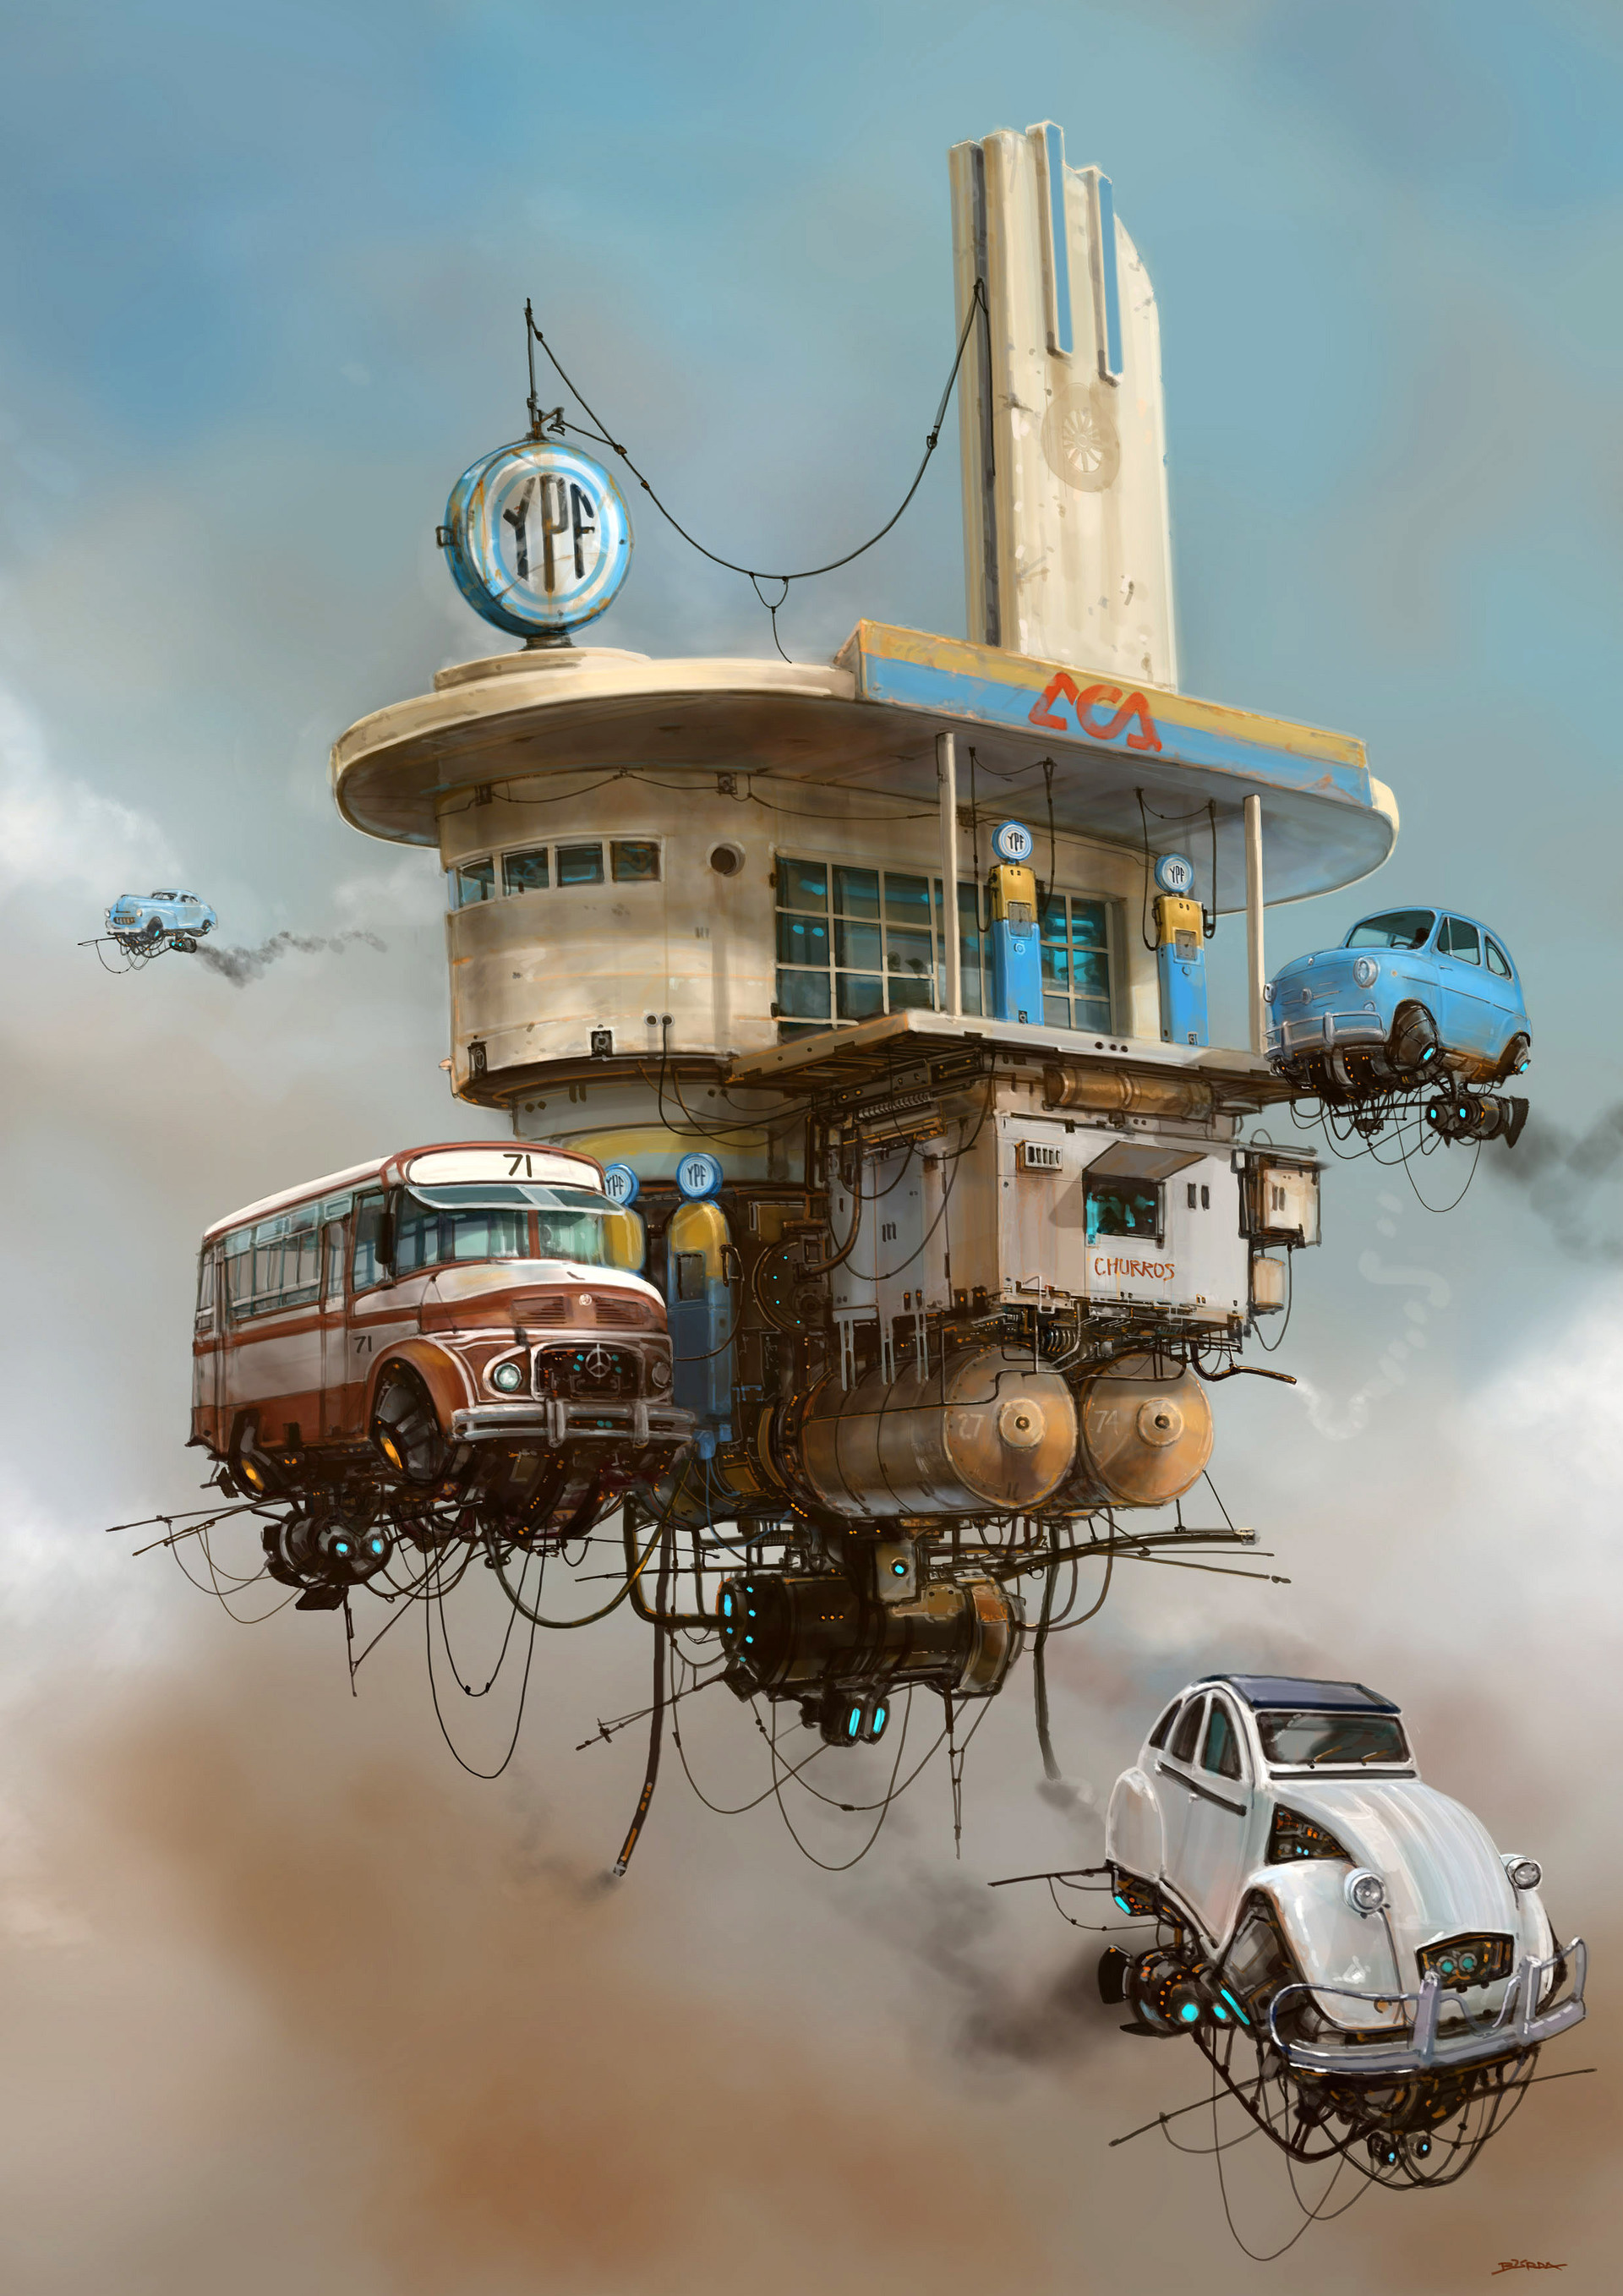 sci-fi, auto, sky, art, building, fiction, that's incredible, ssi-fi cellphone